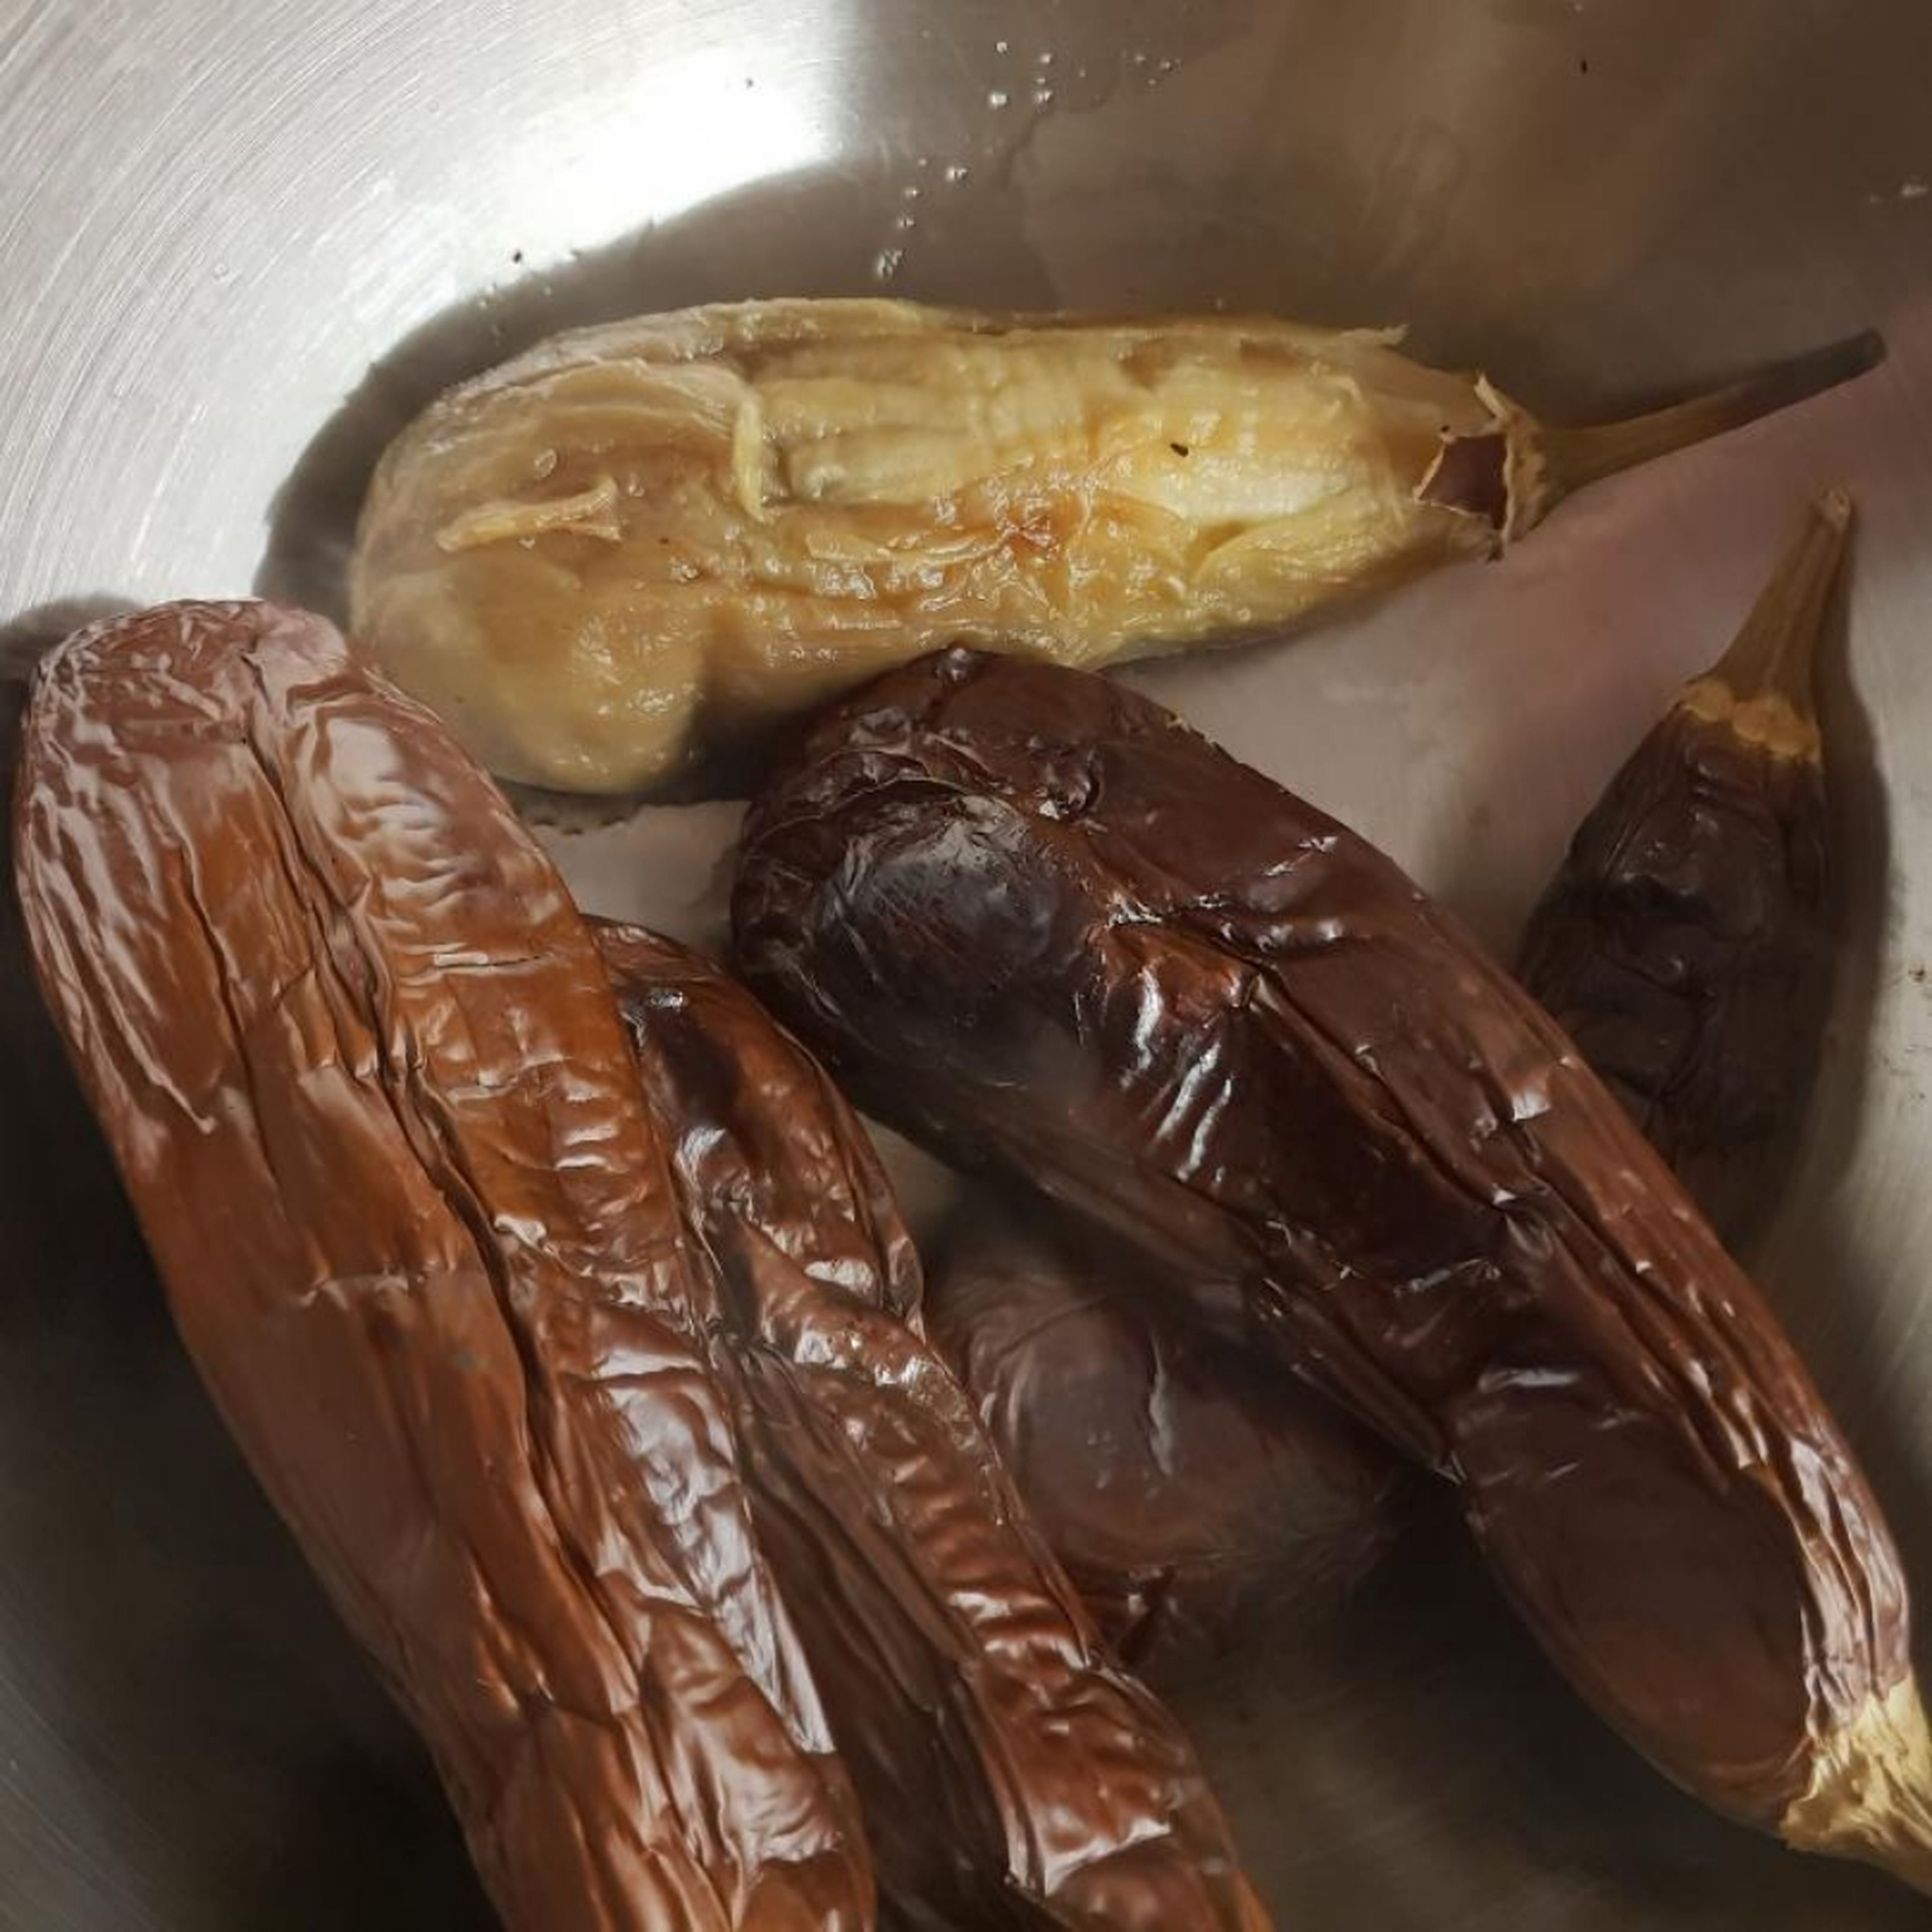 Peel the eggplants while still hot and make sure no peel pieces are left as these can be bitter. Use a pliers.